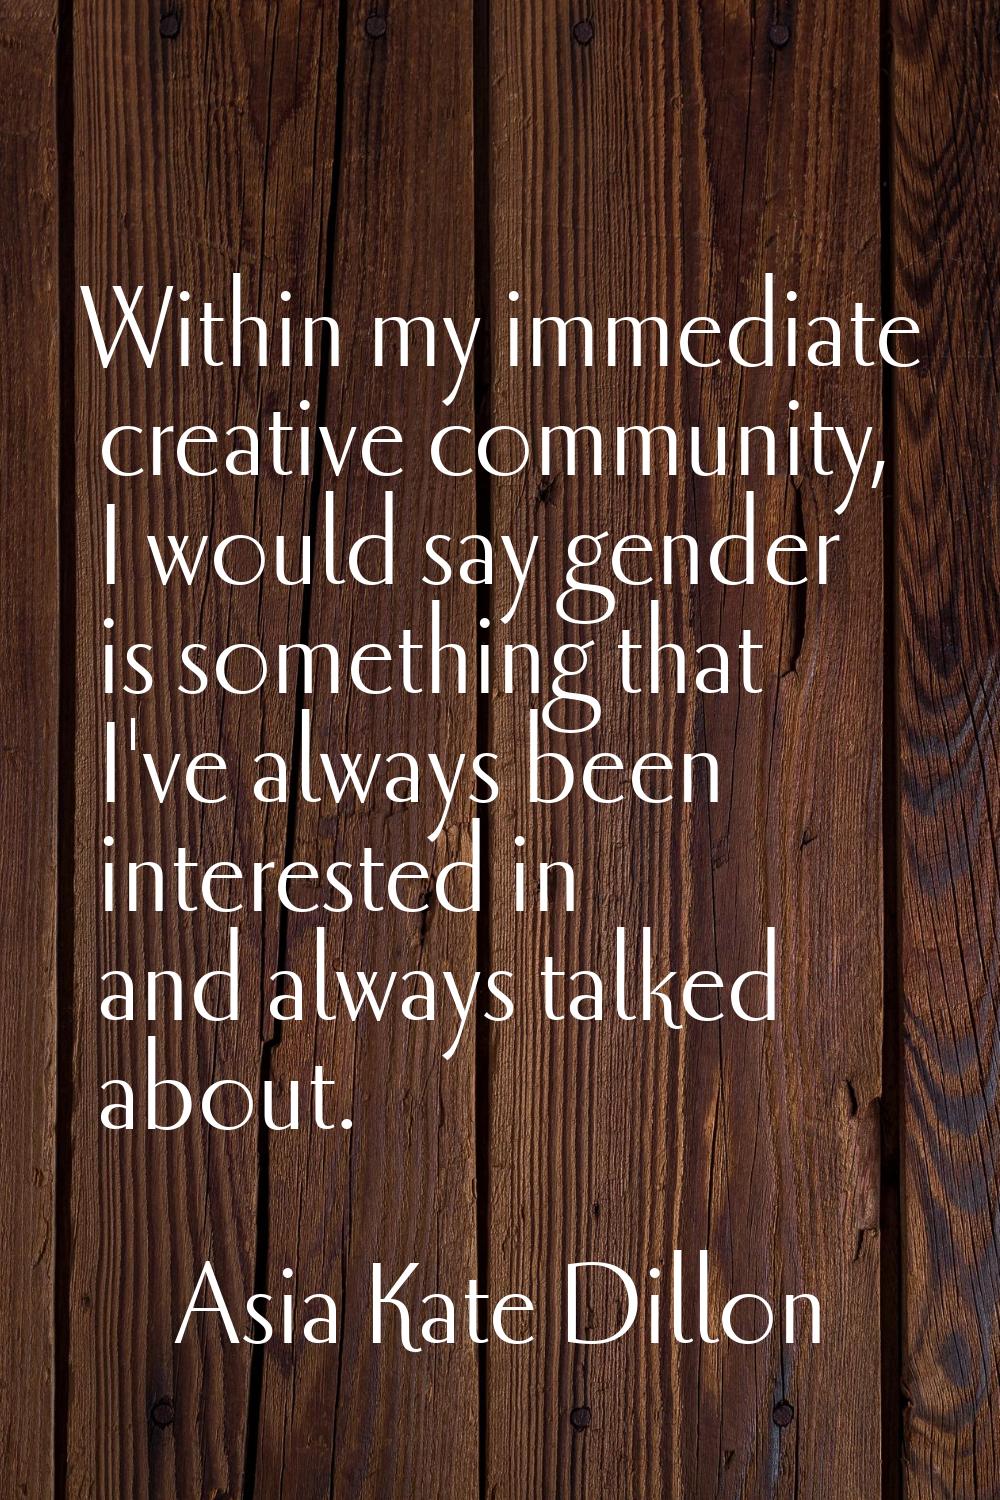 Within my immediate creative community, I would say gender is something that I've always been inter